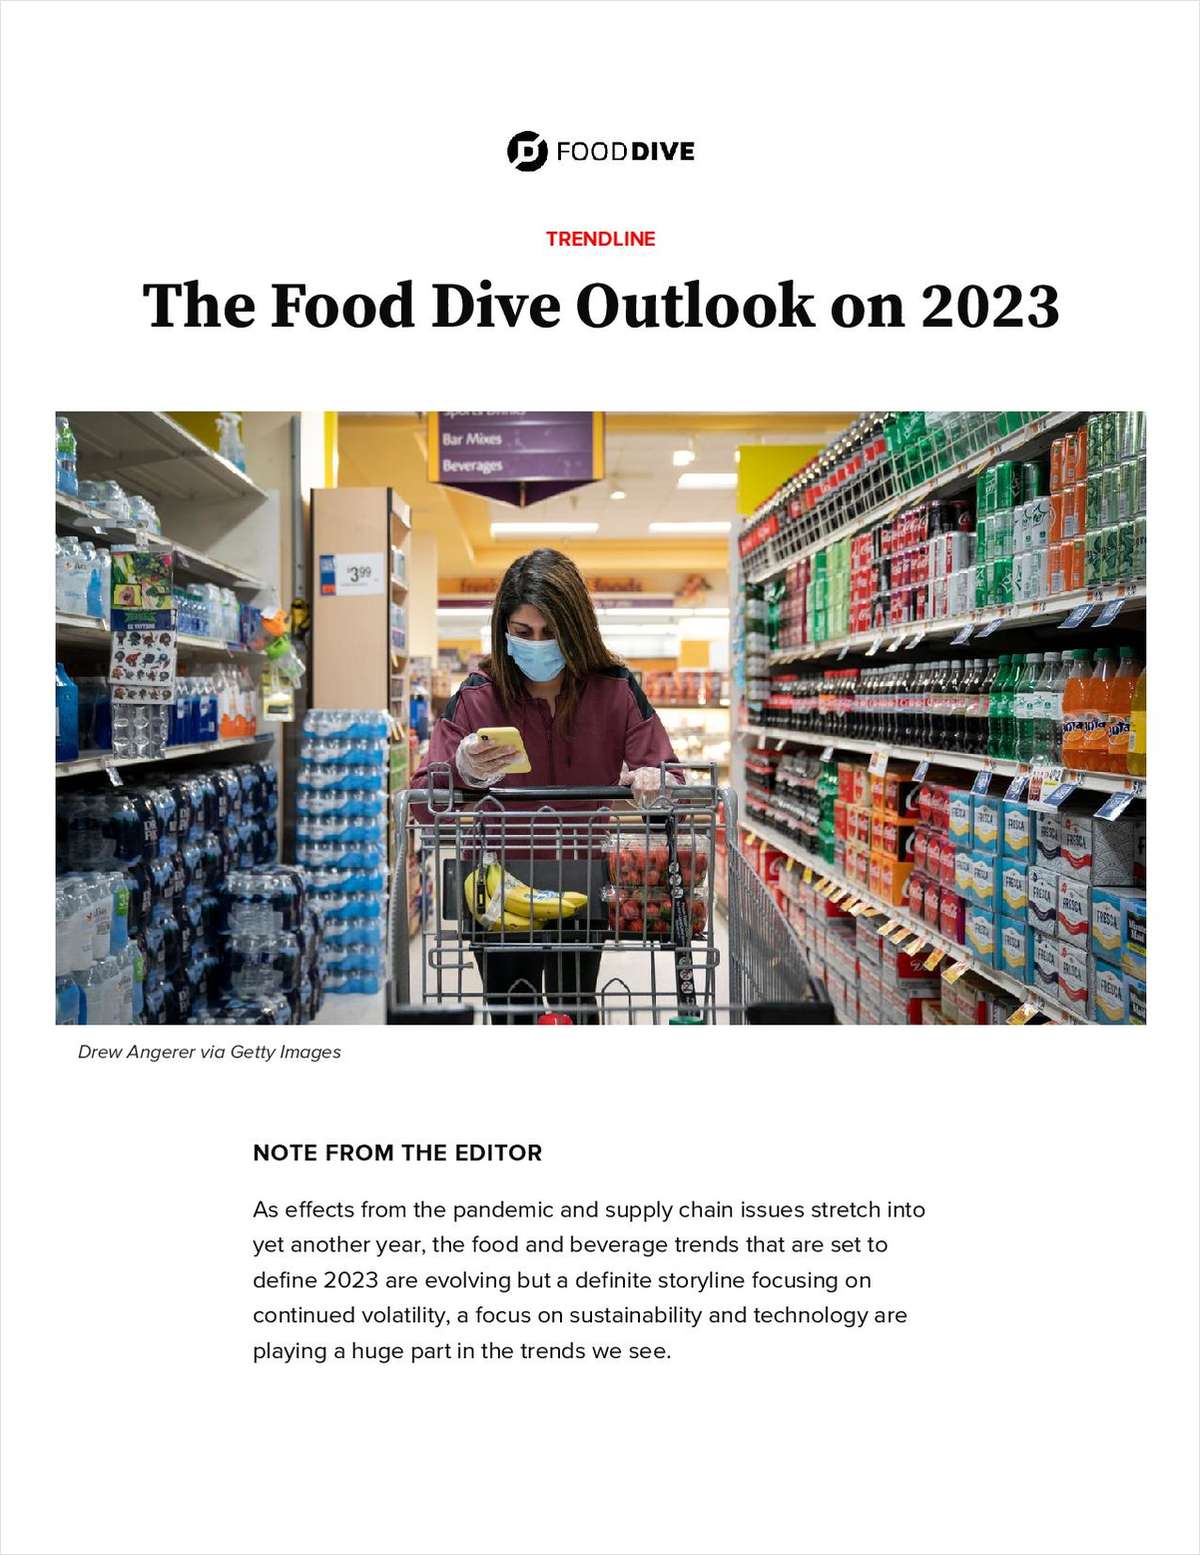 The Food Dive Outlook on 2023